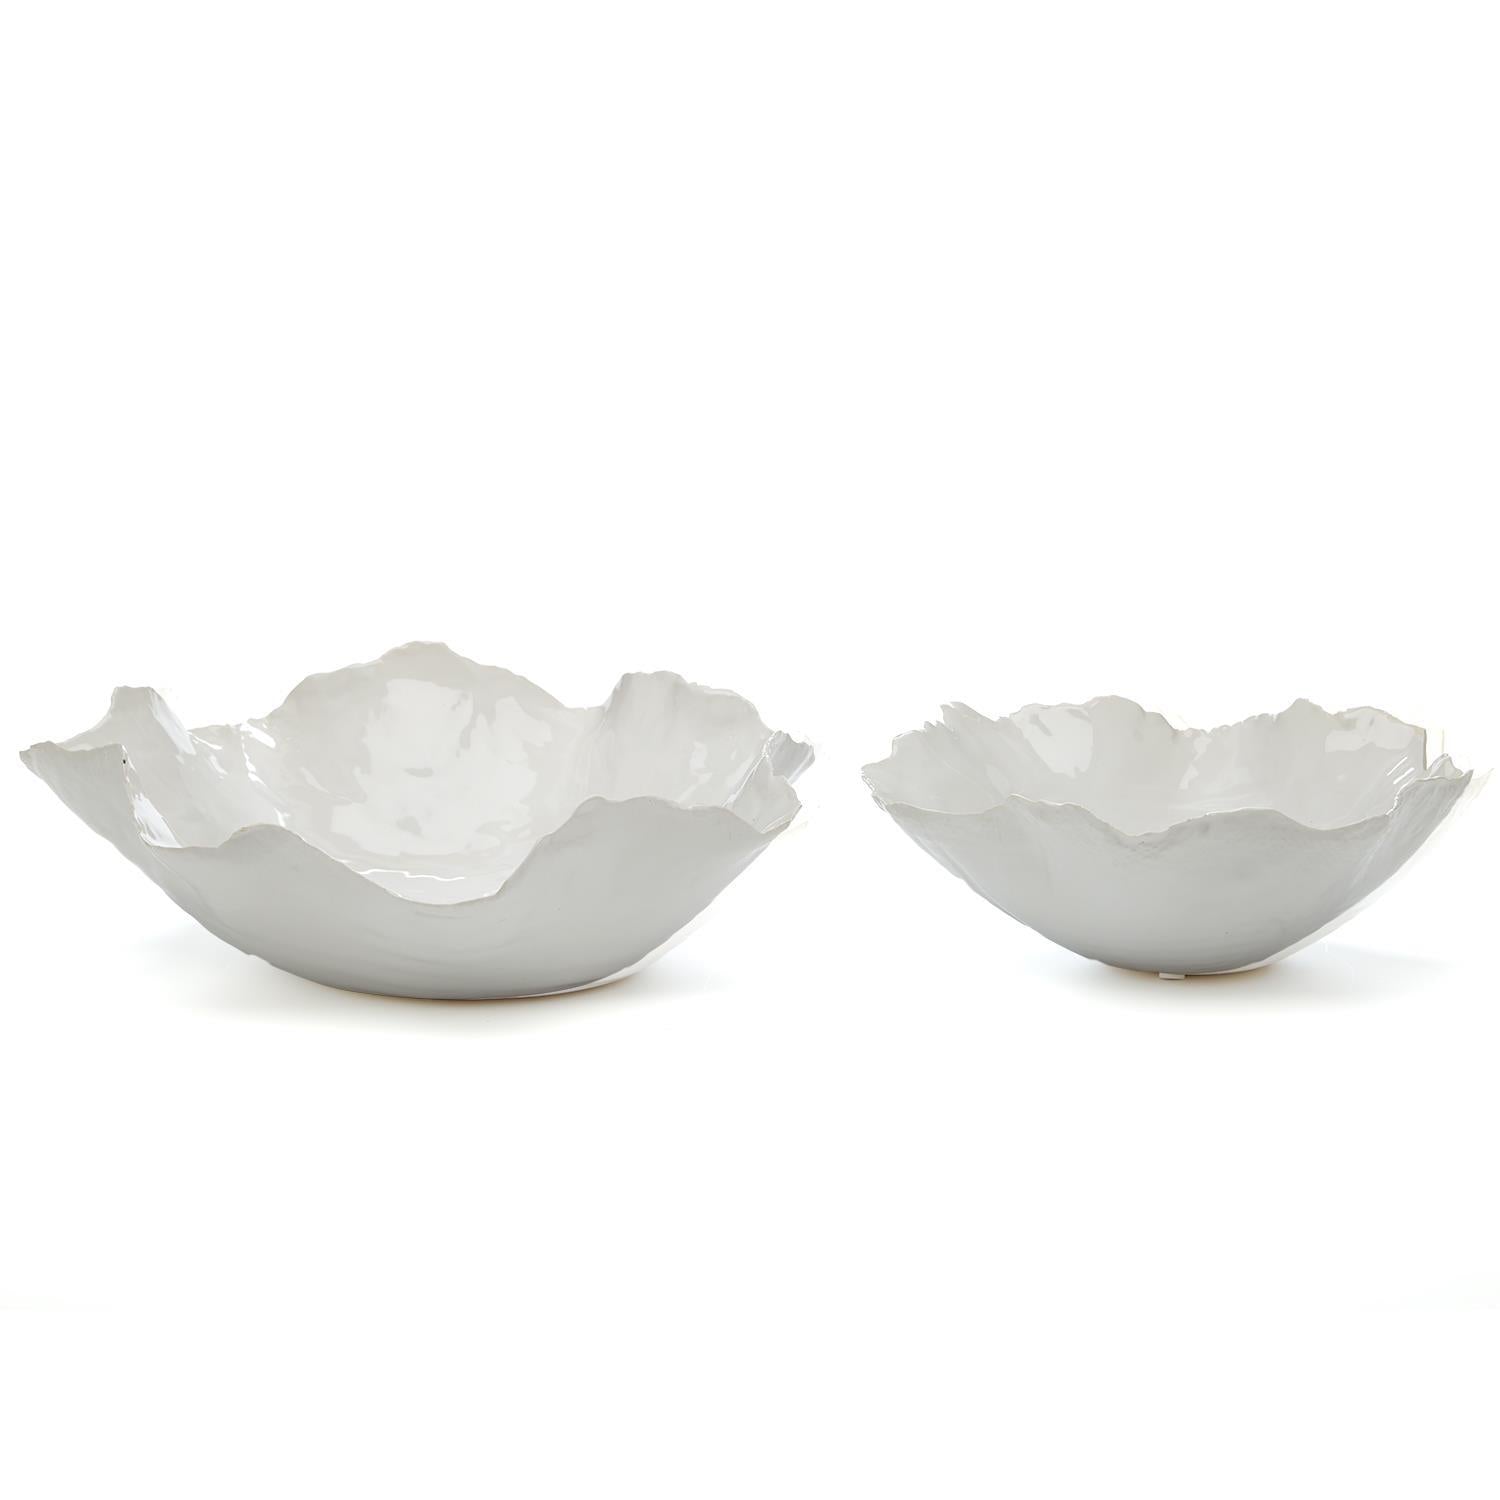 Two's Company White Free Form Bowls - Ceramic (set of 2)